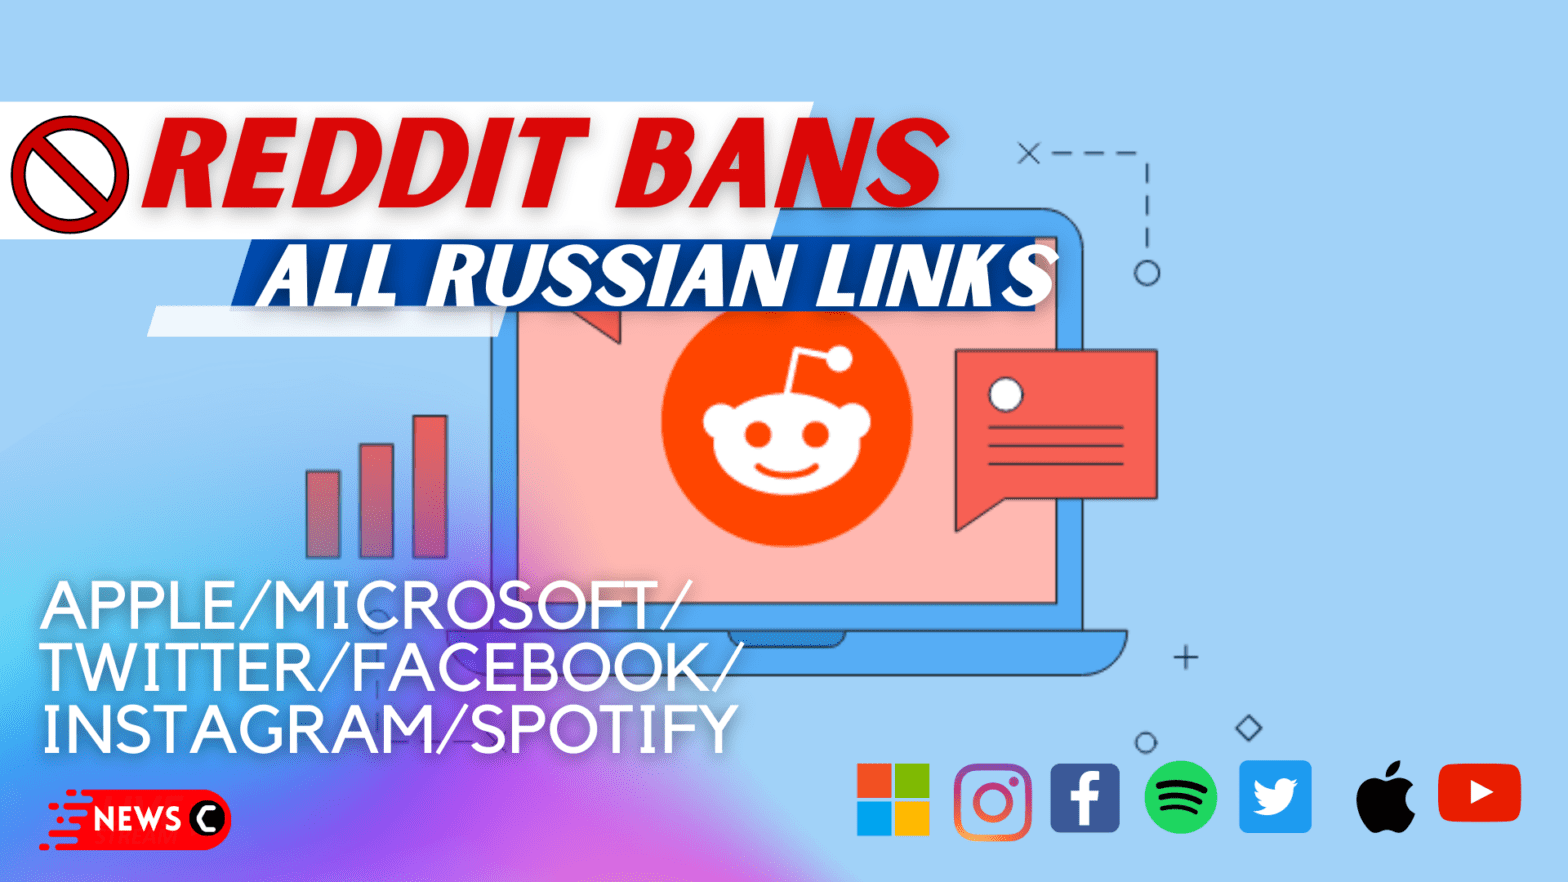 Reddit bans all links to Russian state